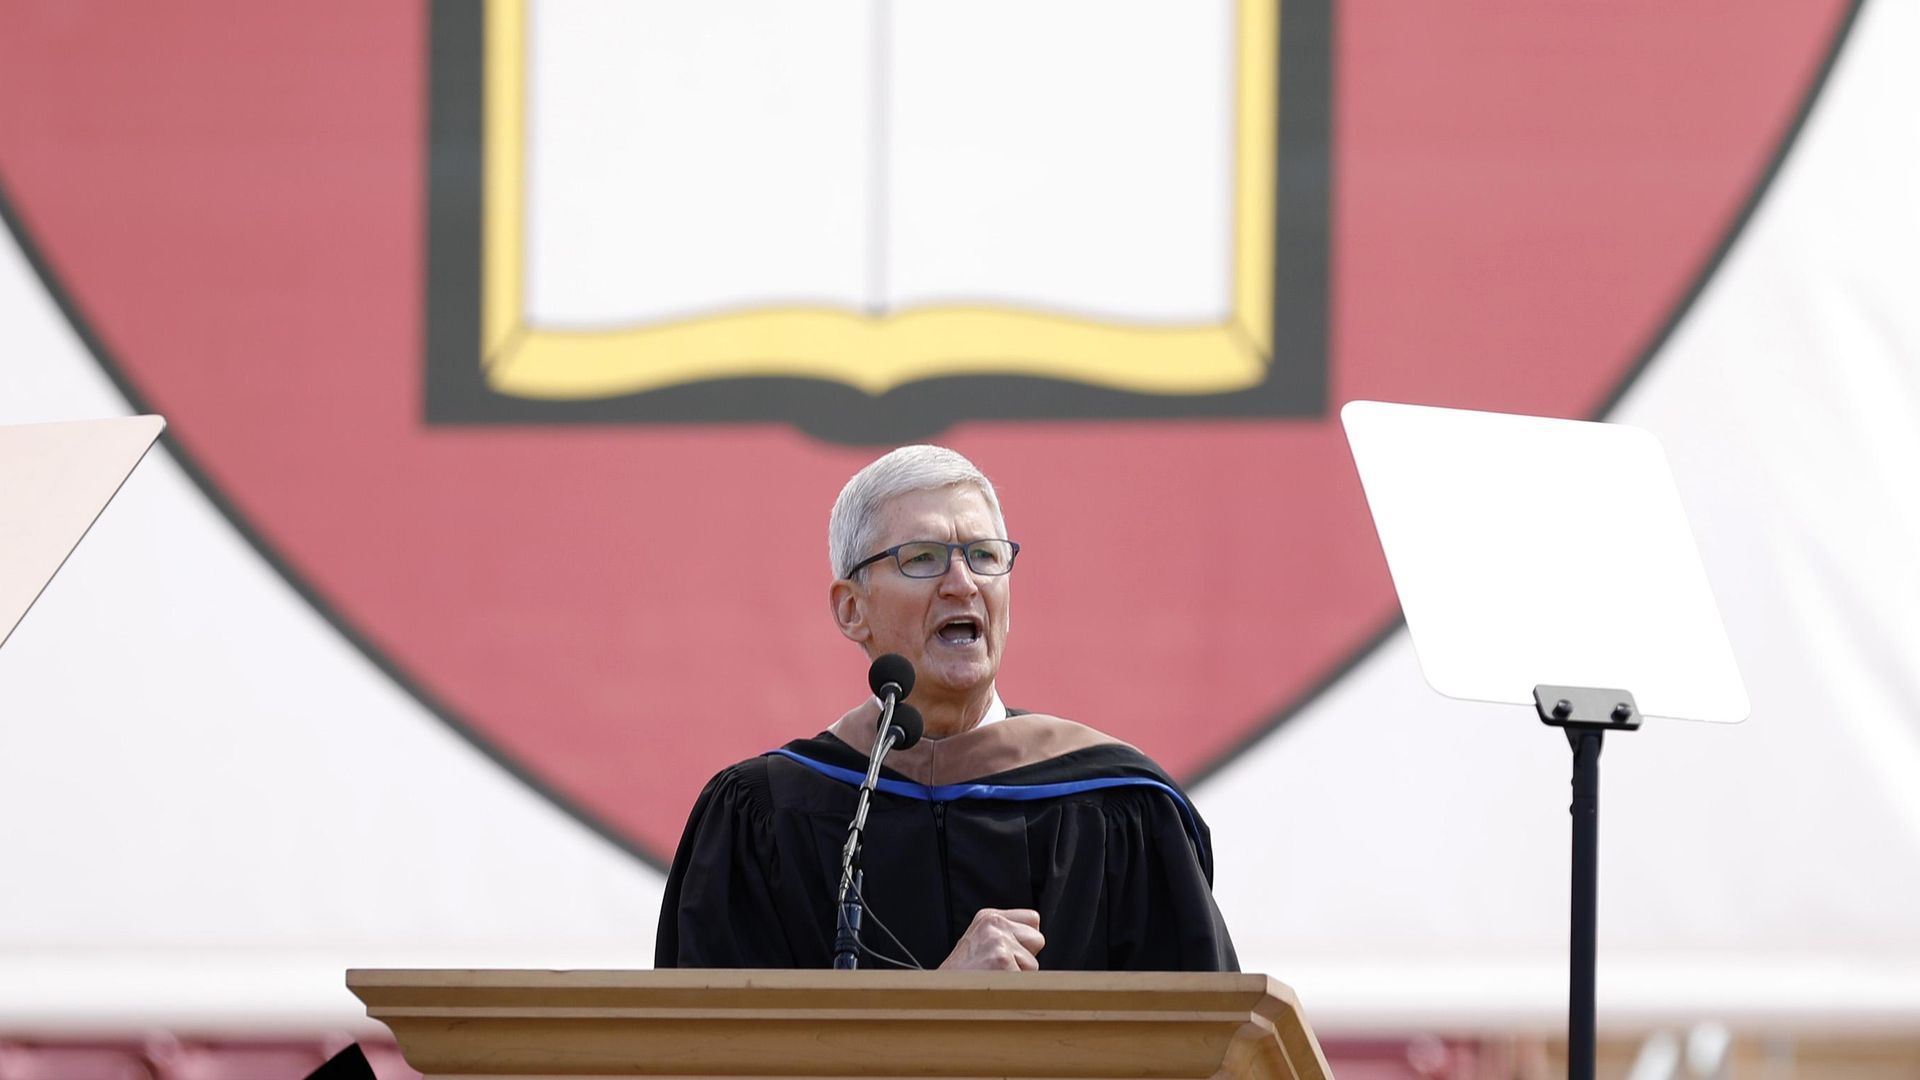 Apple CEO Tim Cook at the lectern during Sunday's commencement for Stanford graduates